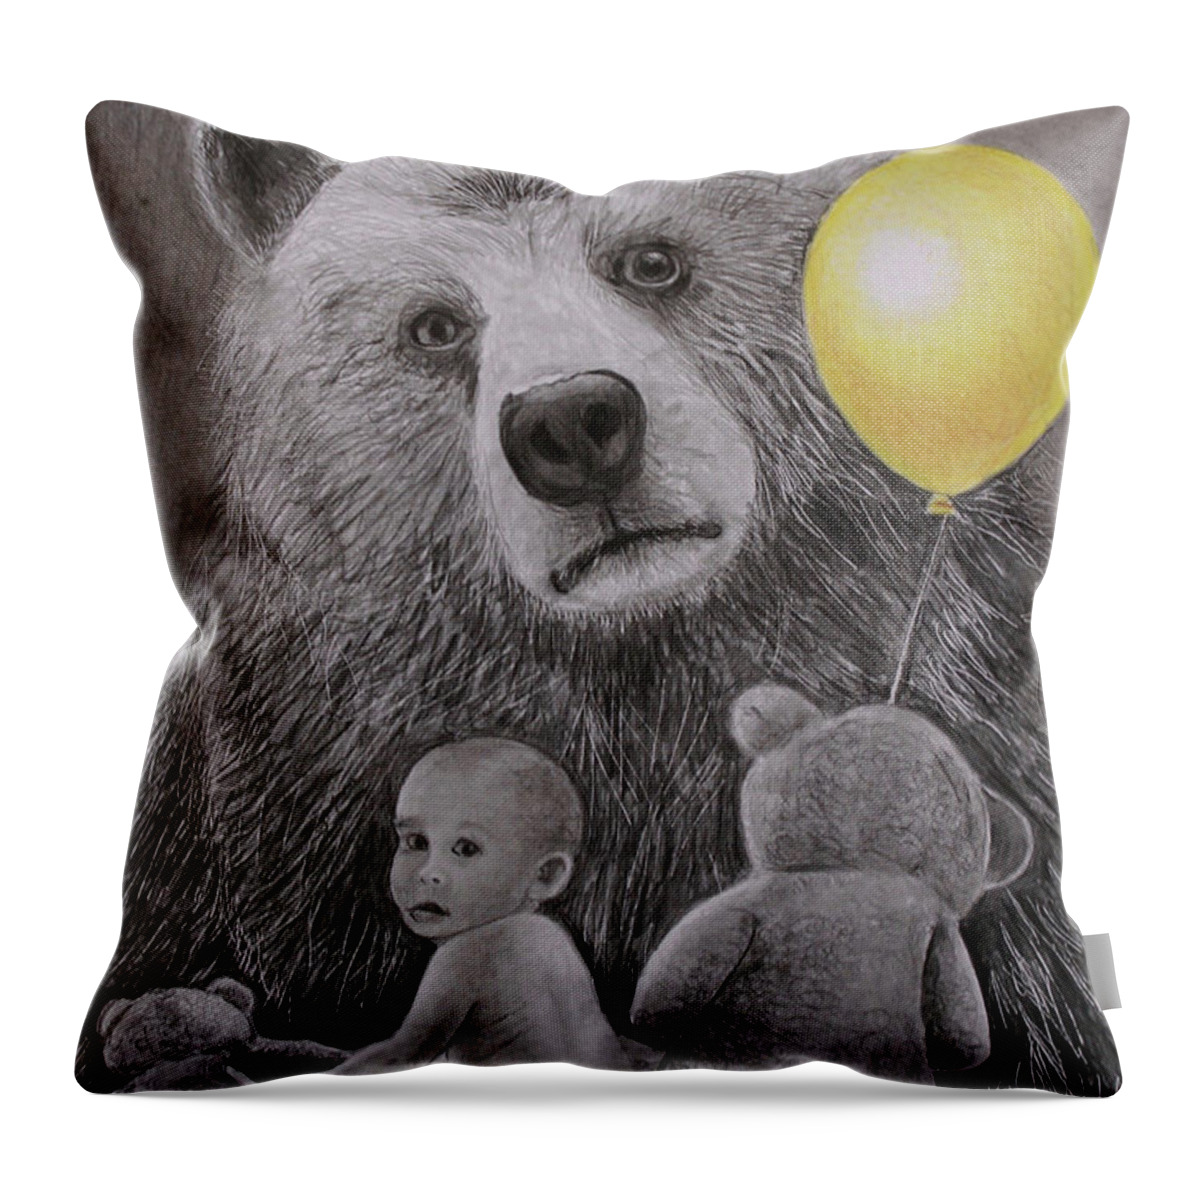 Monotone Throw Pillow featuring the drawing Goldilocks and the three bears by Tim Ernst